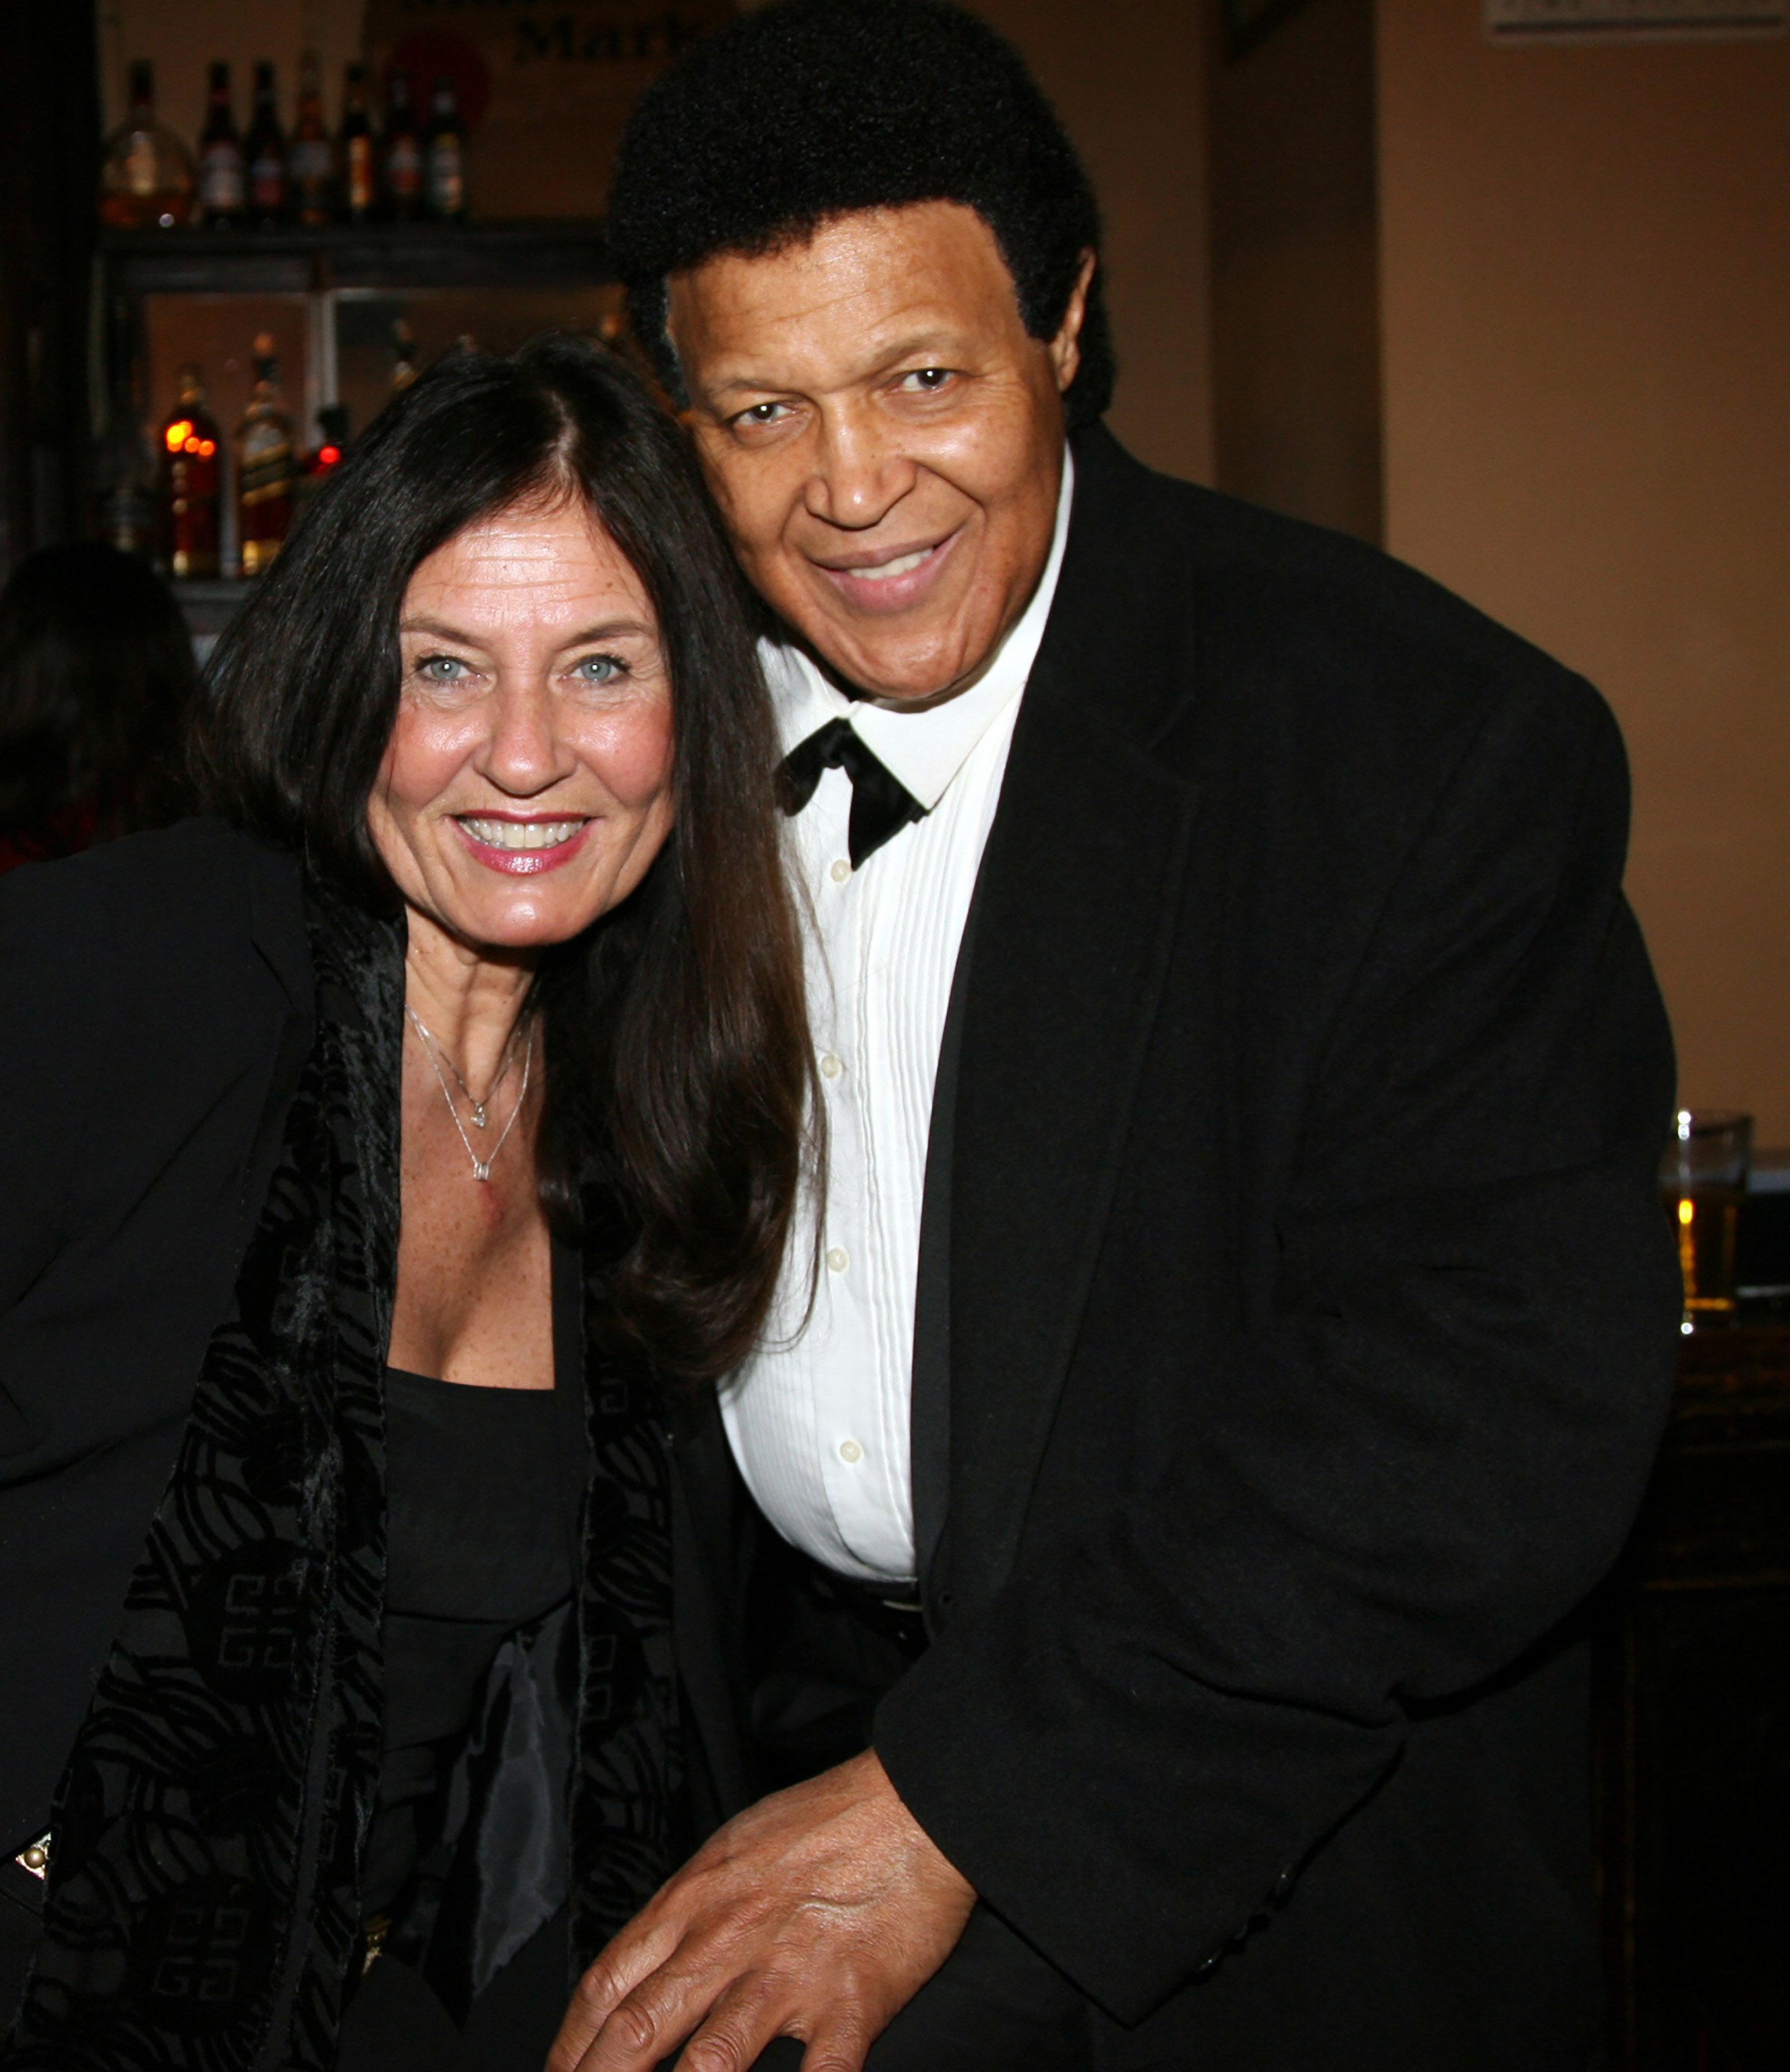 Chubby Checker with his wife, Catharina Lodders at The Cutting Room on March 6, 2008, in New York City. | Source: Getty Images